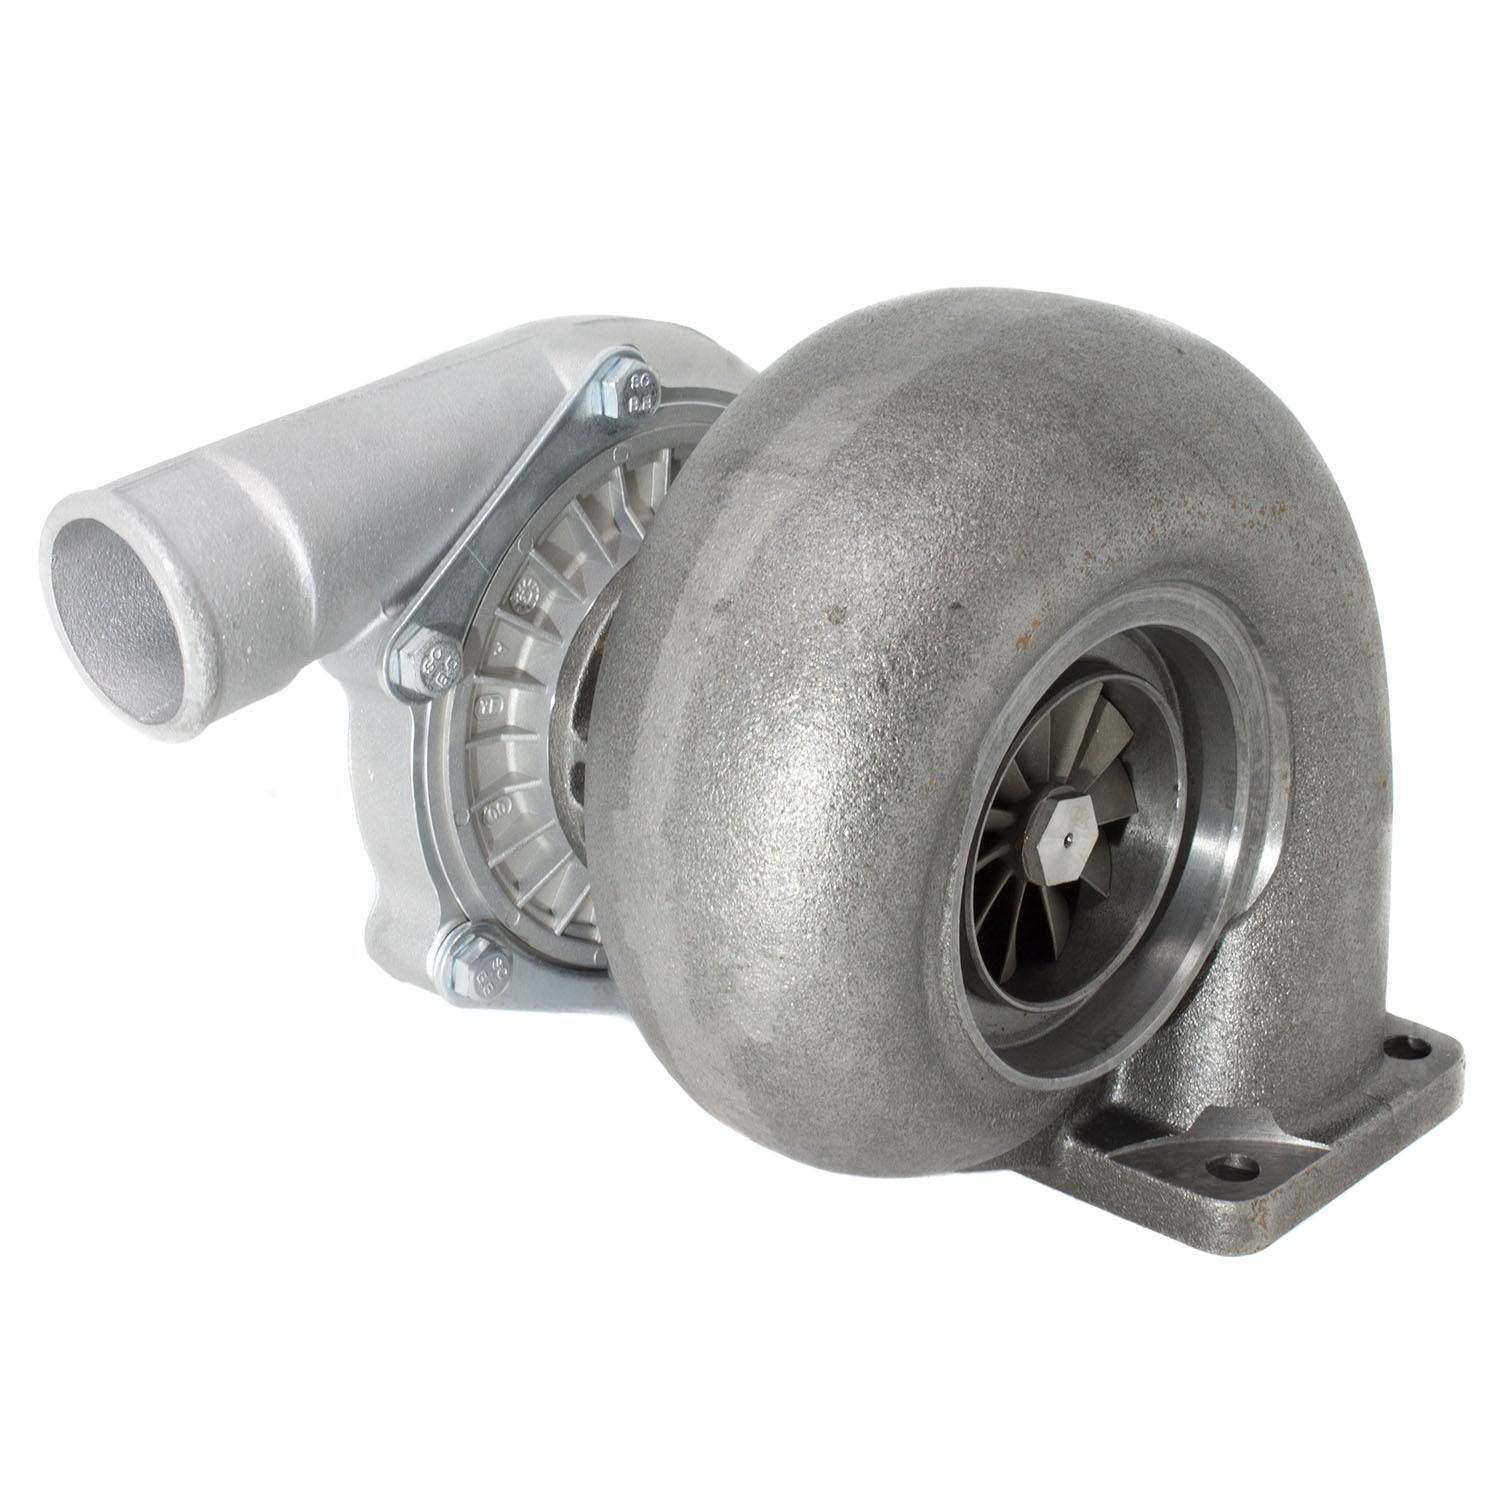 Duraforce A44499, Turbocharger For Case